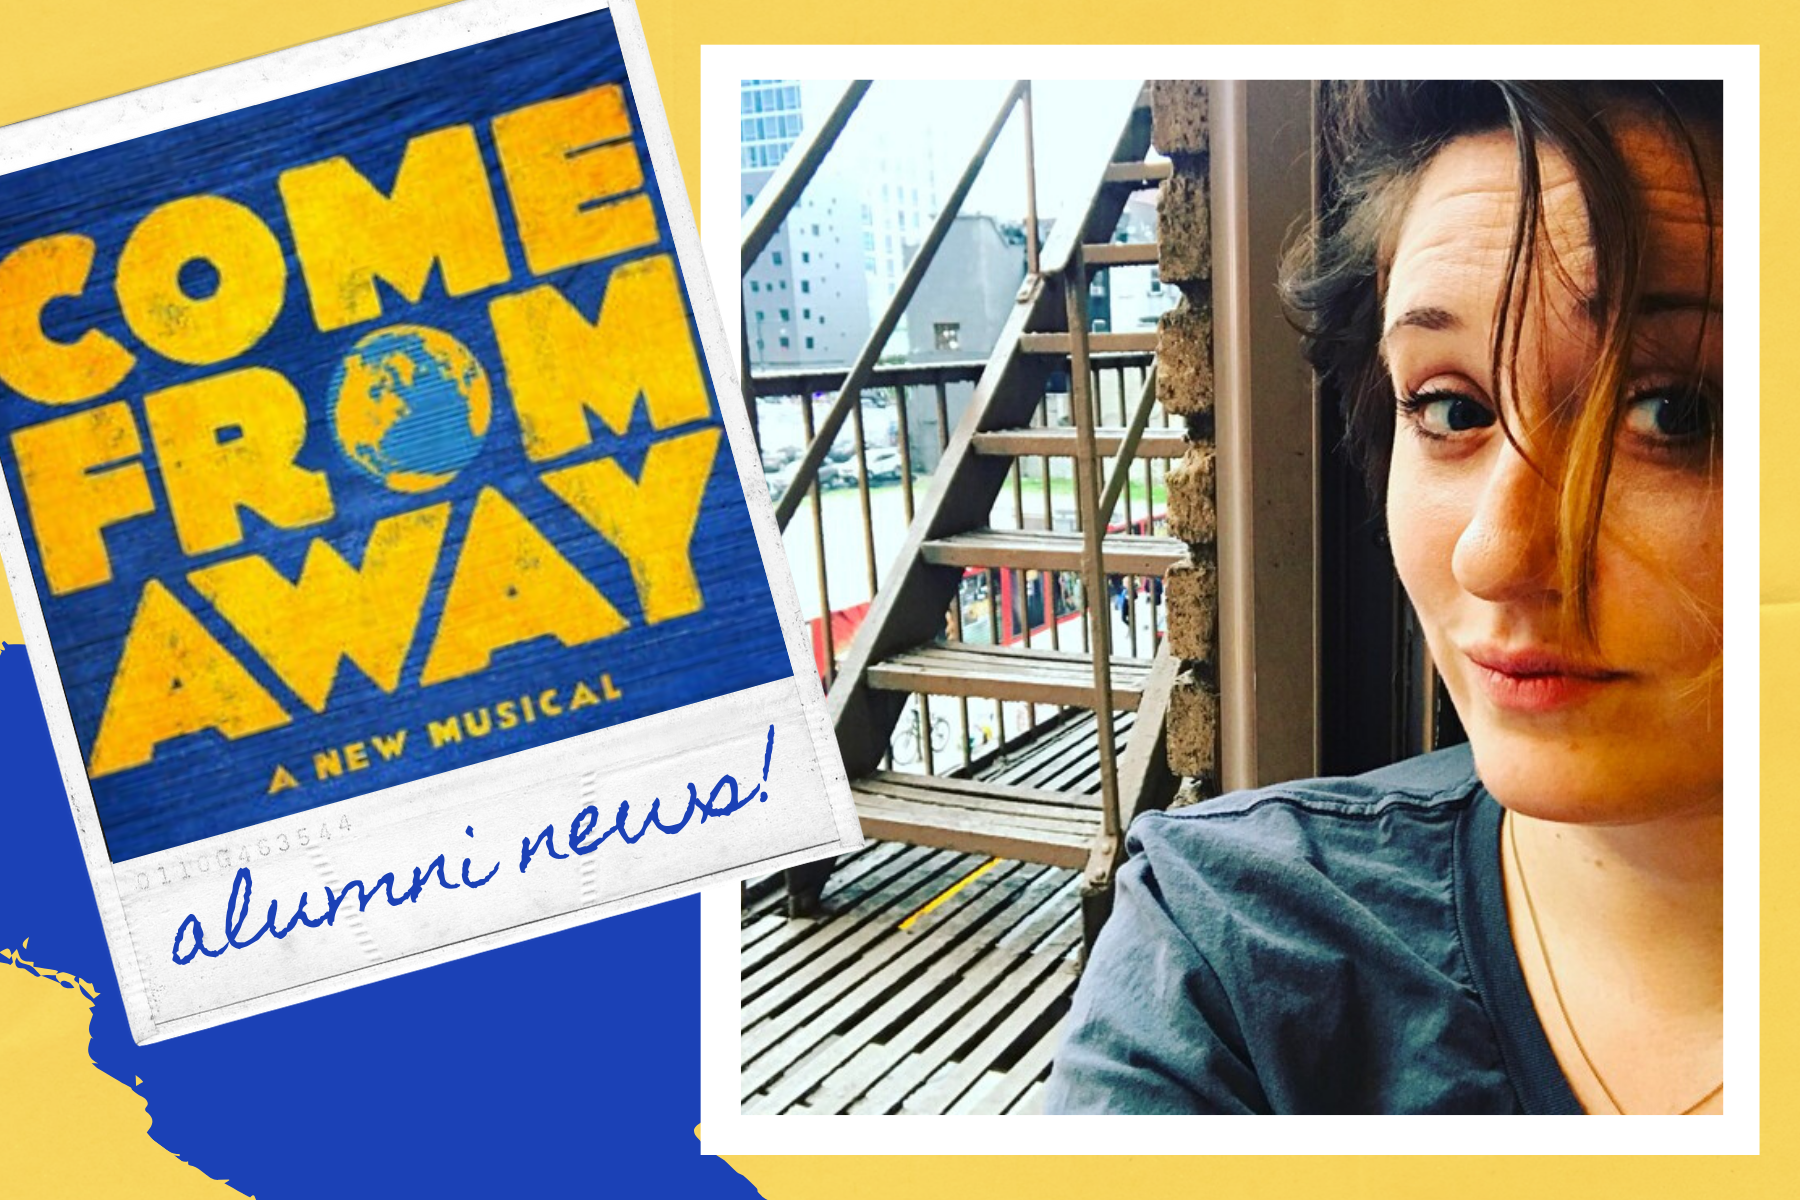 Allie Dillard ’08 worked on "Come From Away" as a backstage dresser